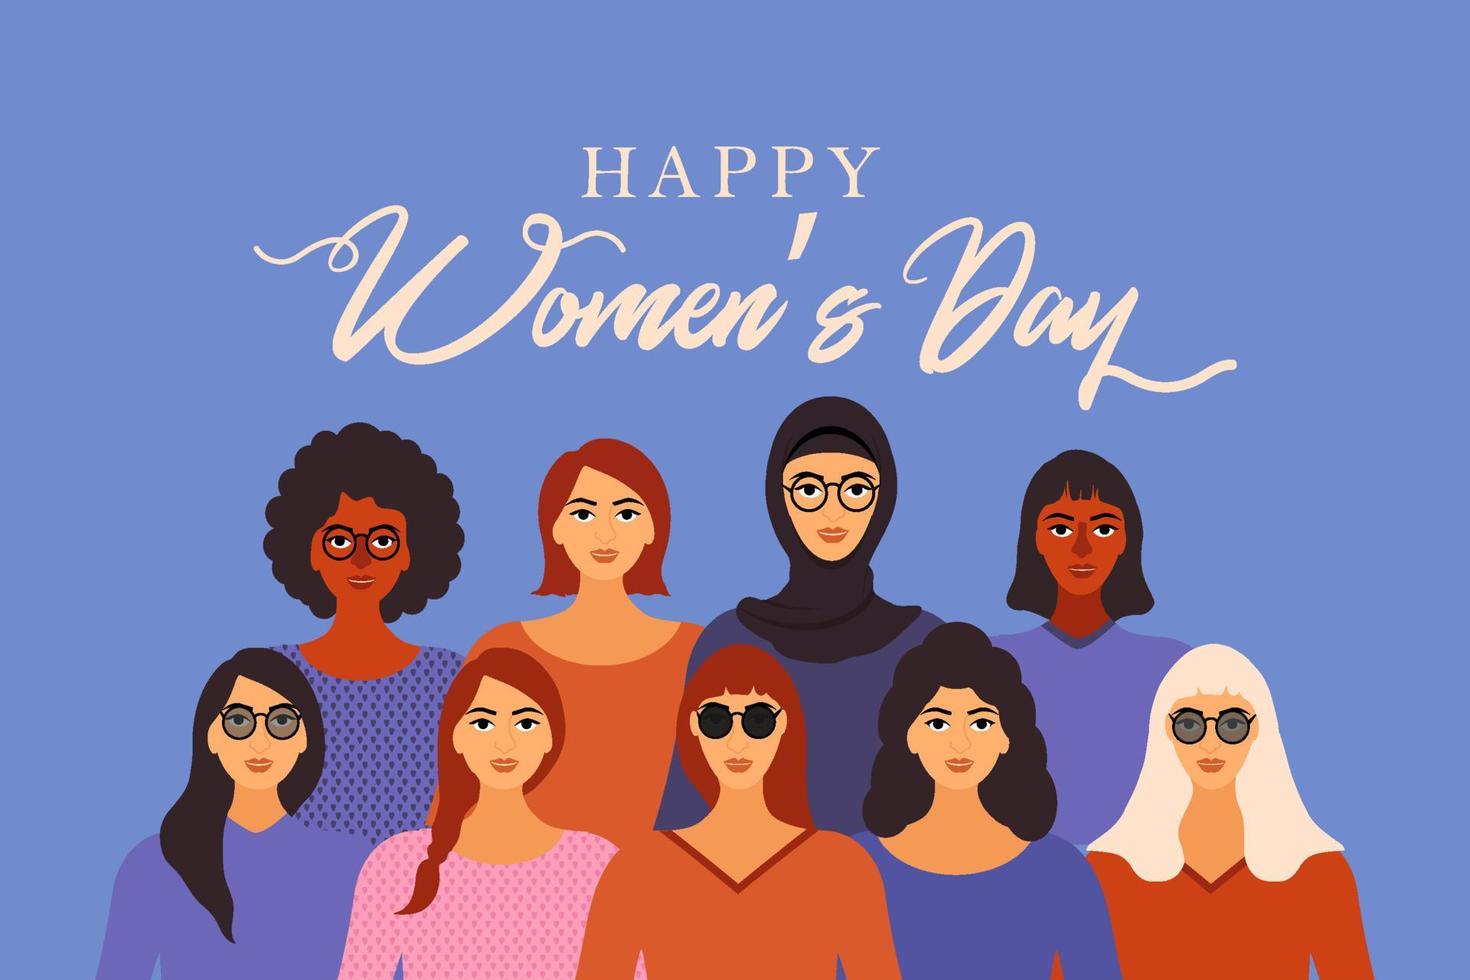 Happy women's day banner illustration, various images of women side by side from different ethnicities and cultures. Strong and brave girls support each other. Brotherhood and female friendship vector